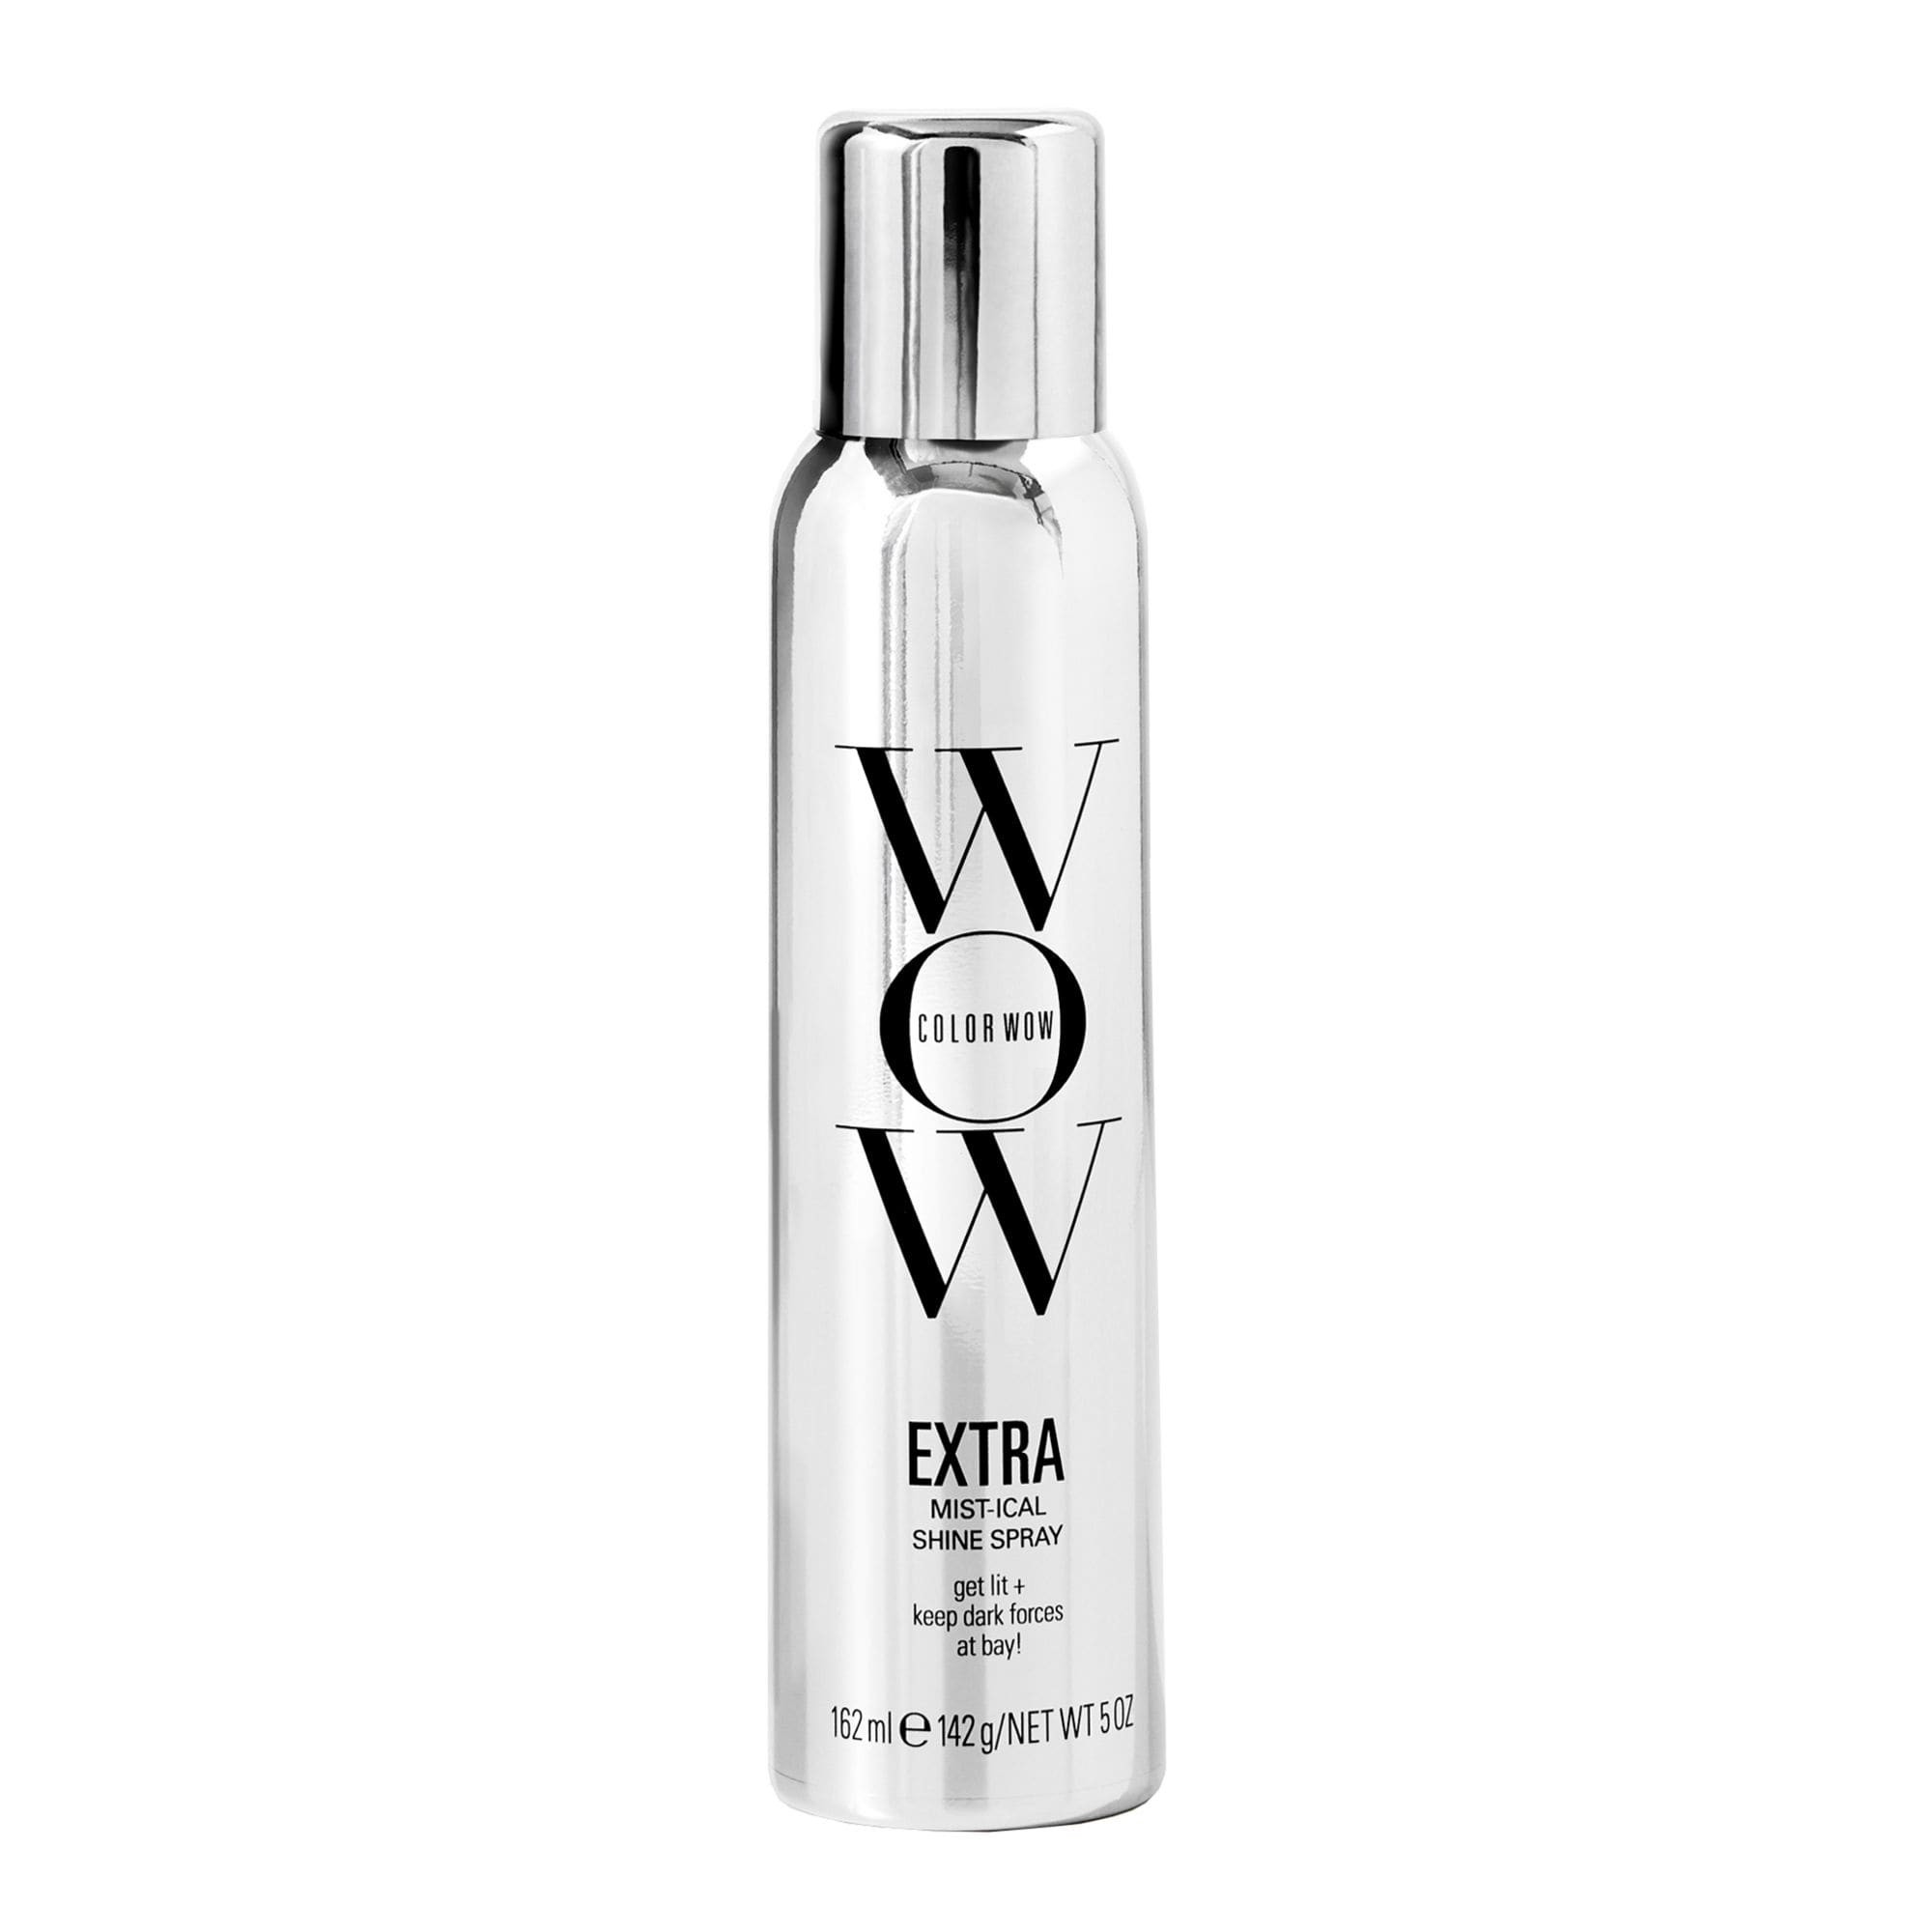 color-wow-color-wow-extra-mist-ical-shine-spray-1